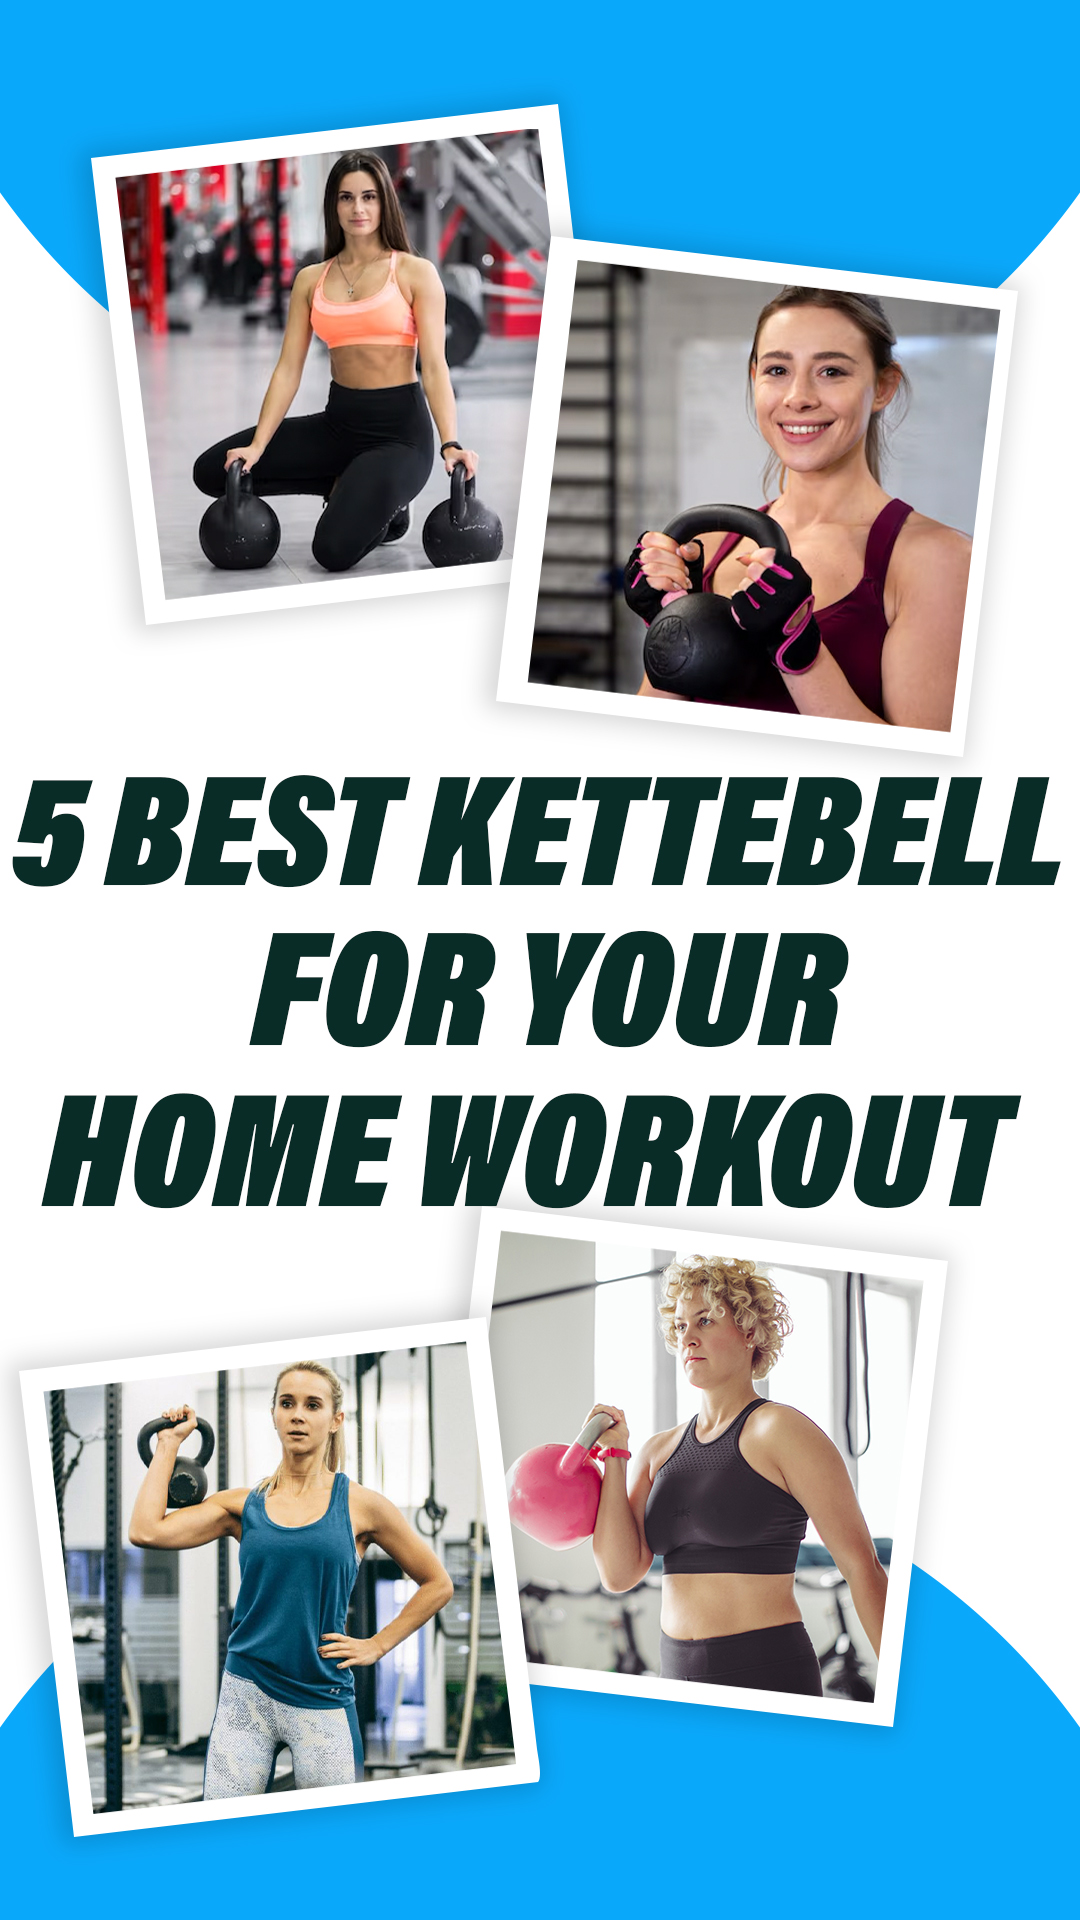 Best kettlebells for Weightlifting and Home Workouts